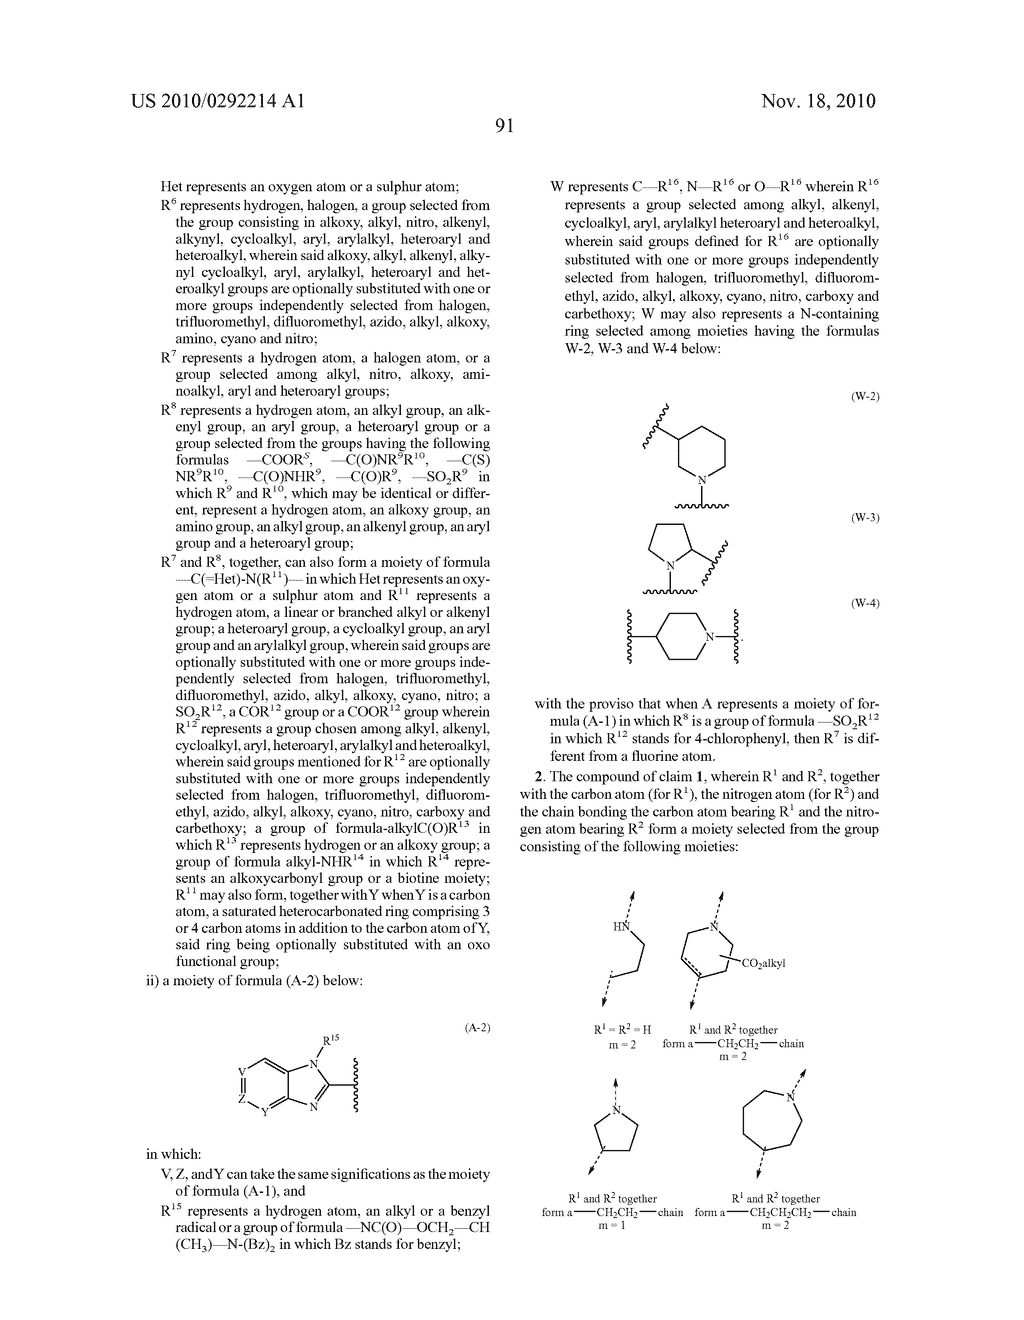 Compounds with Antiparasitic Activity, Applications thereof to the Treatment of Infectious Diseases Caused by Apicomplexans - diagram, schematic, and image 92